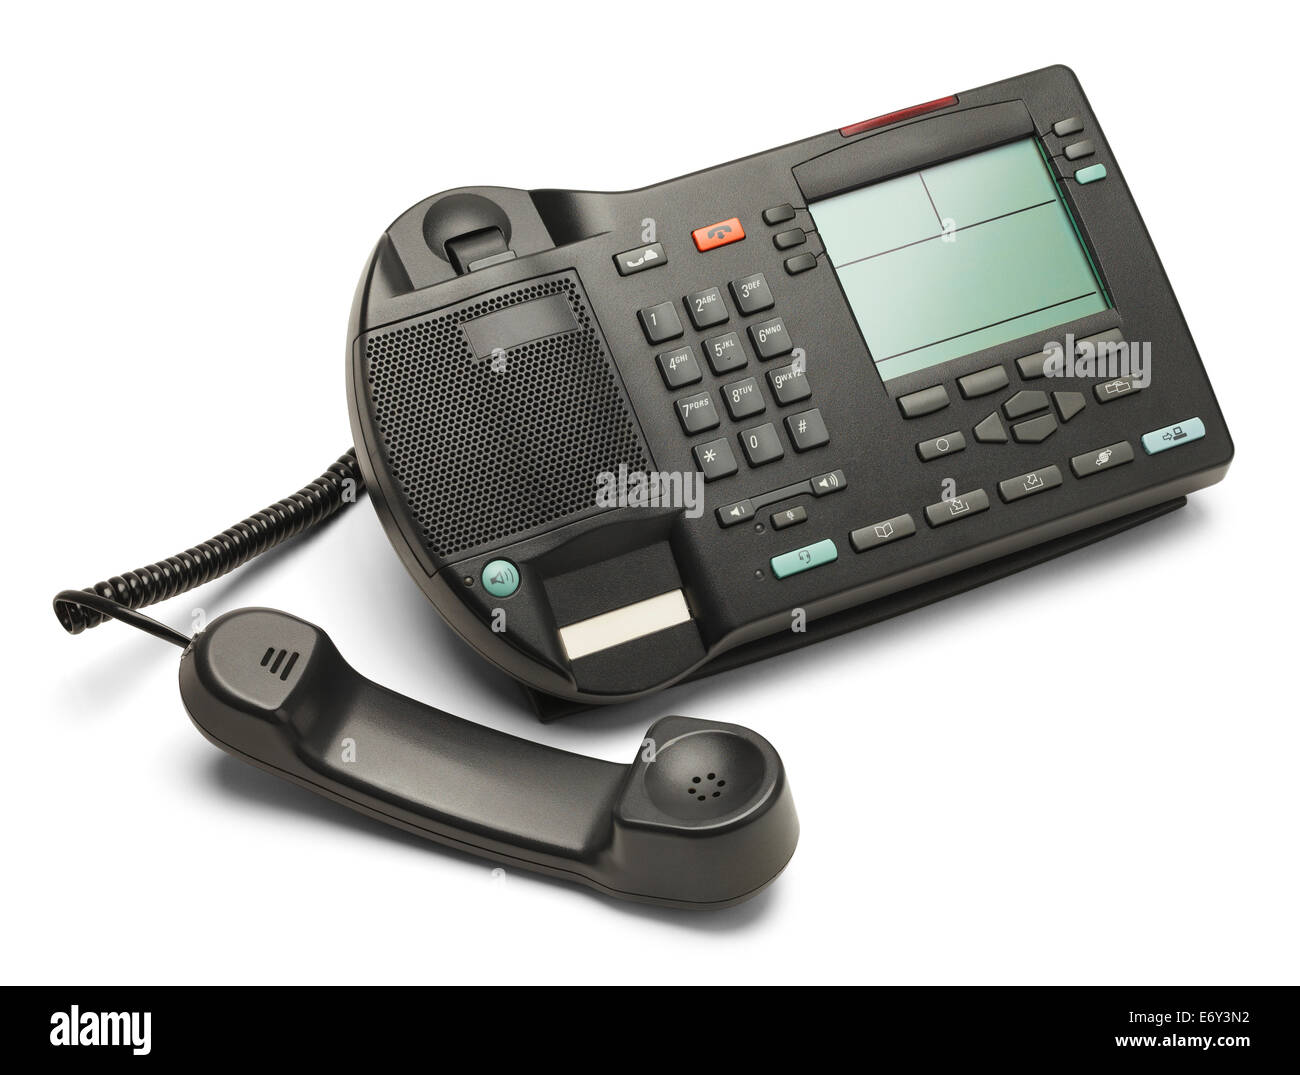 Black Office Business Phone Off The Hook Isolated on White Background. Stock Photo